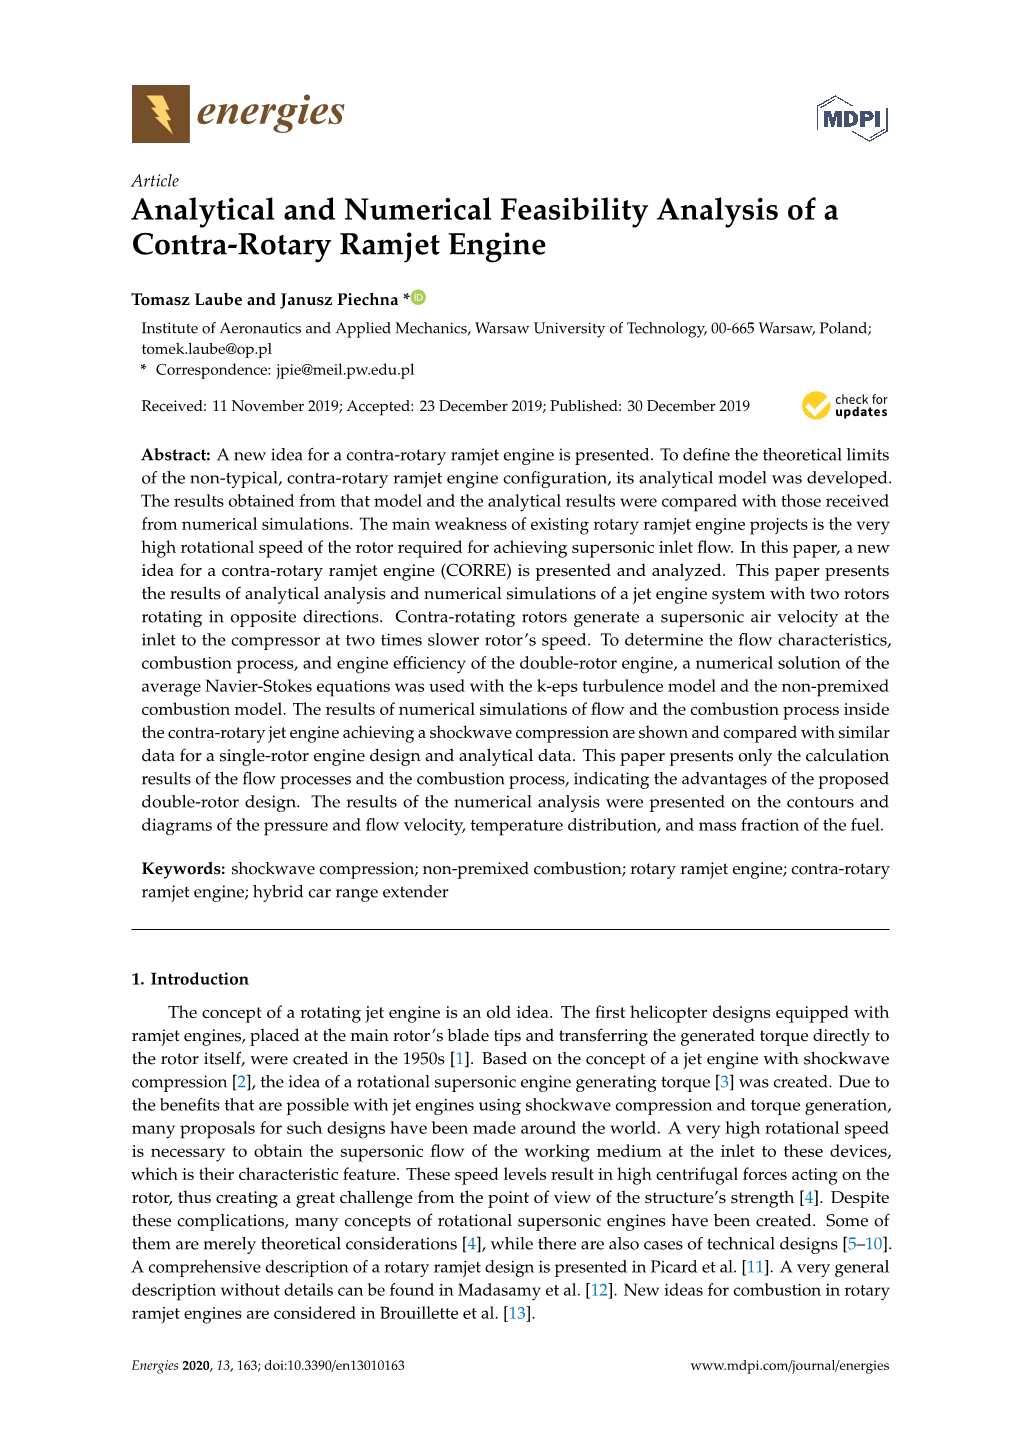 Analytical and Numerical Feasibility Analysis of a Contra-Rotary Ramjet Engine